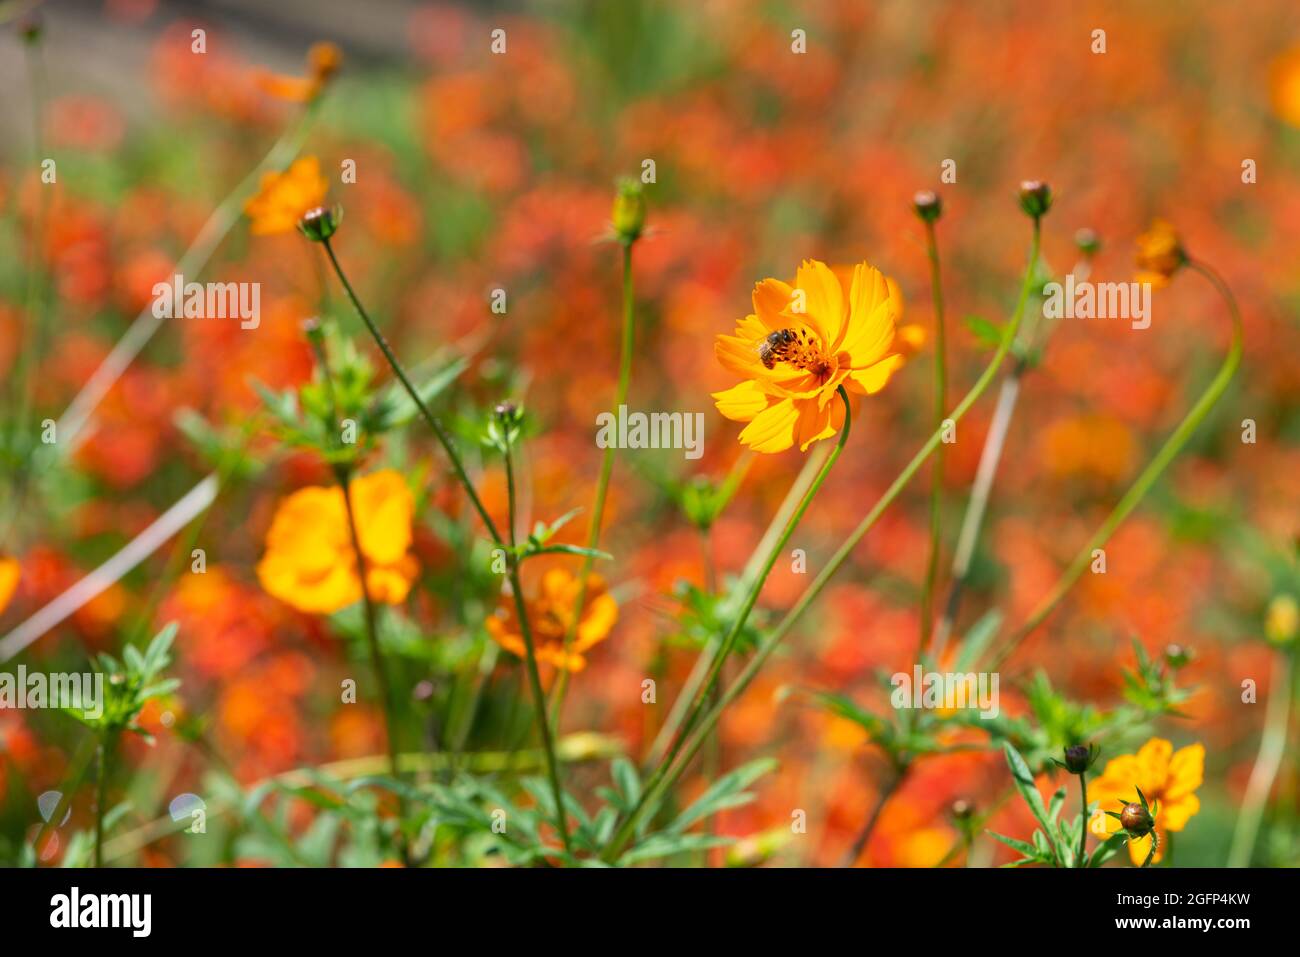 Lance-leaved coreopsis, Coreopsis lanceolata, blooming in a field. Stock Photo